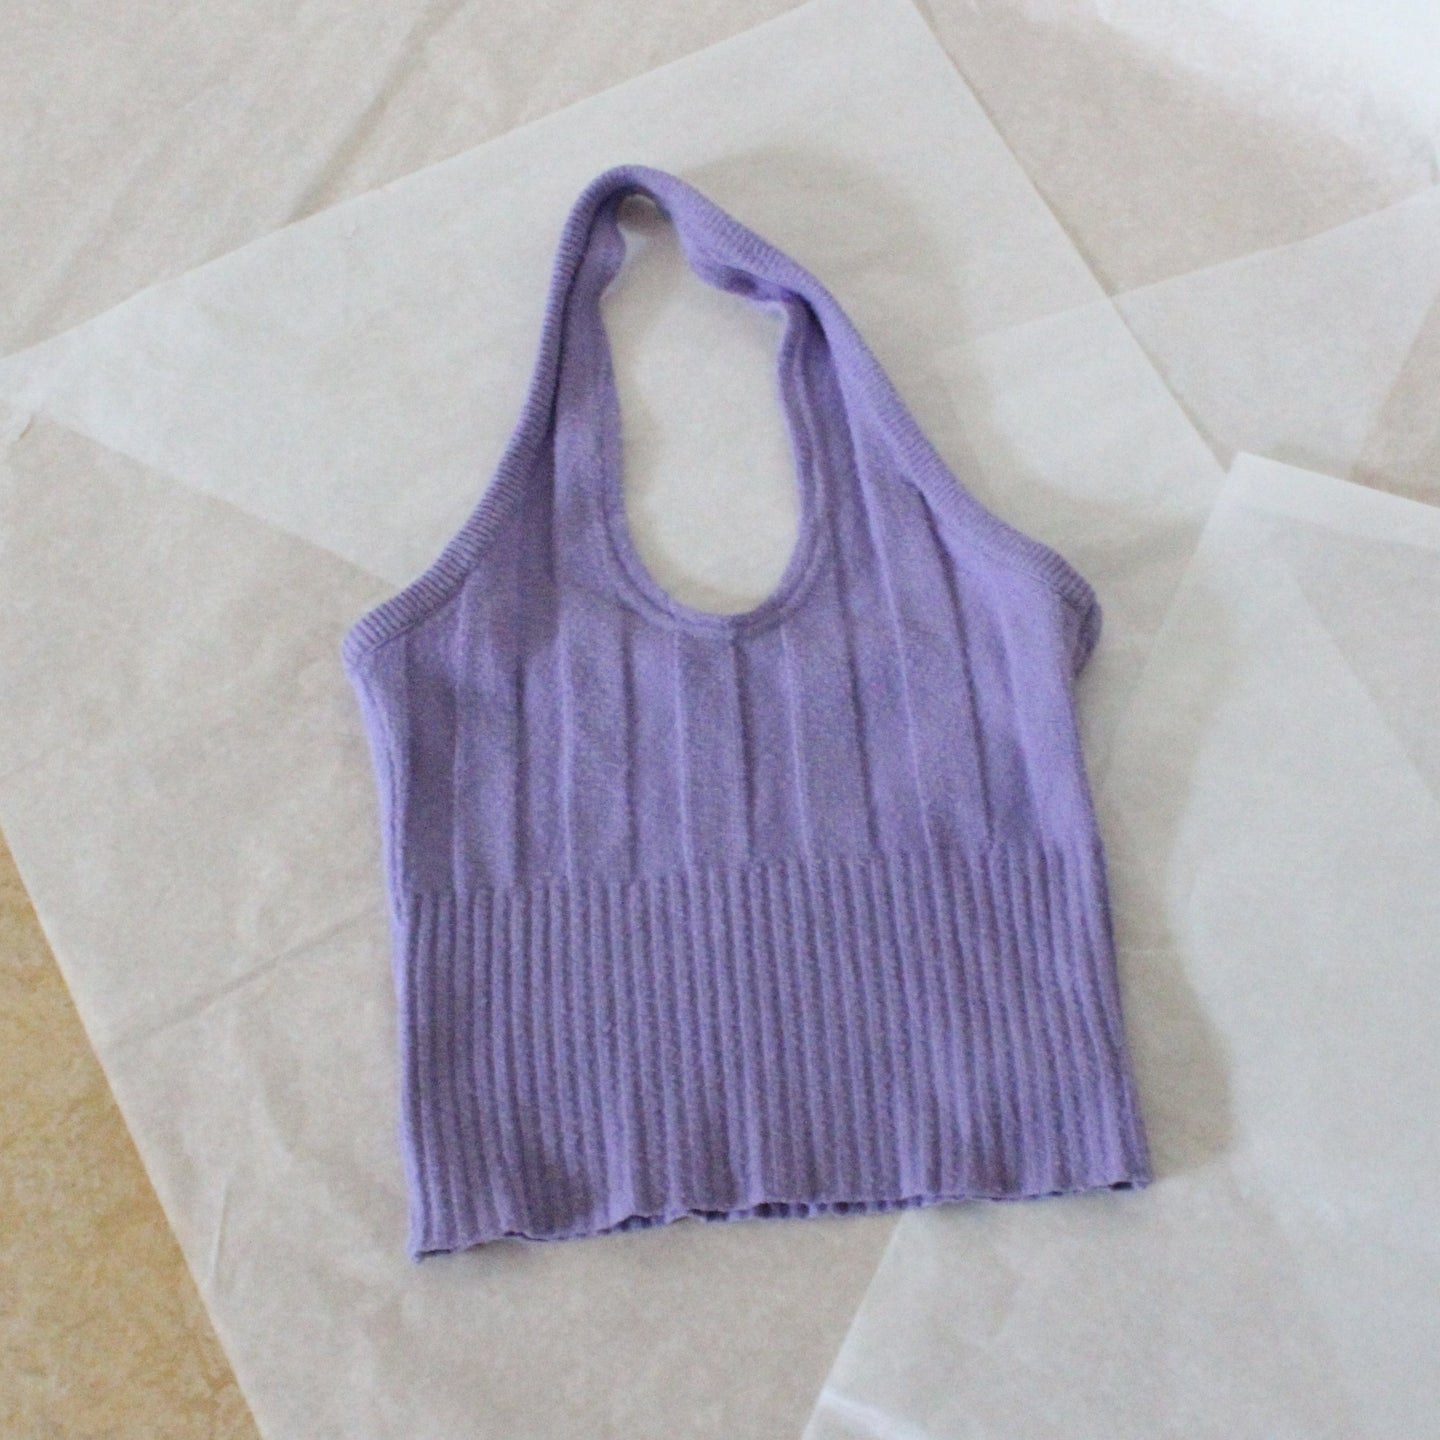 90's lilac halter top, size XS/S